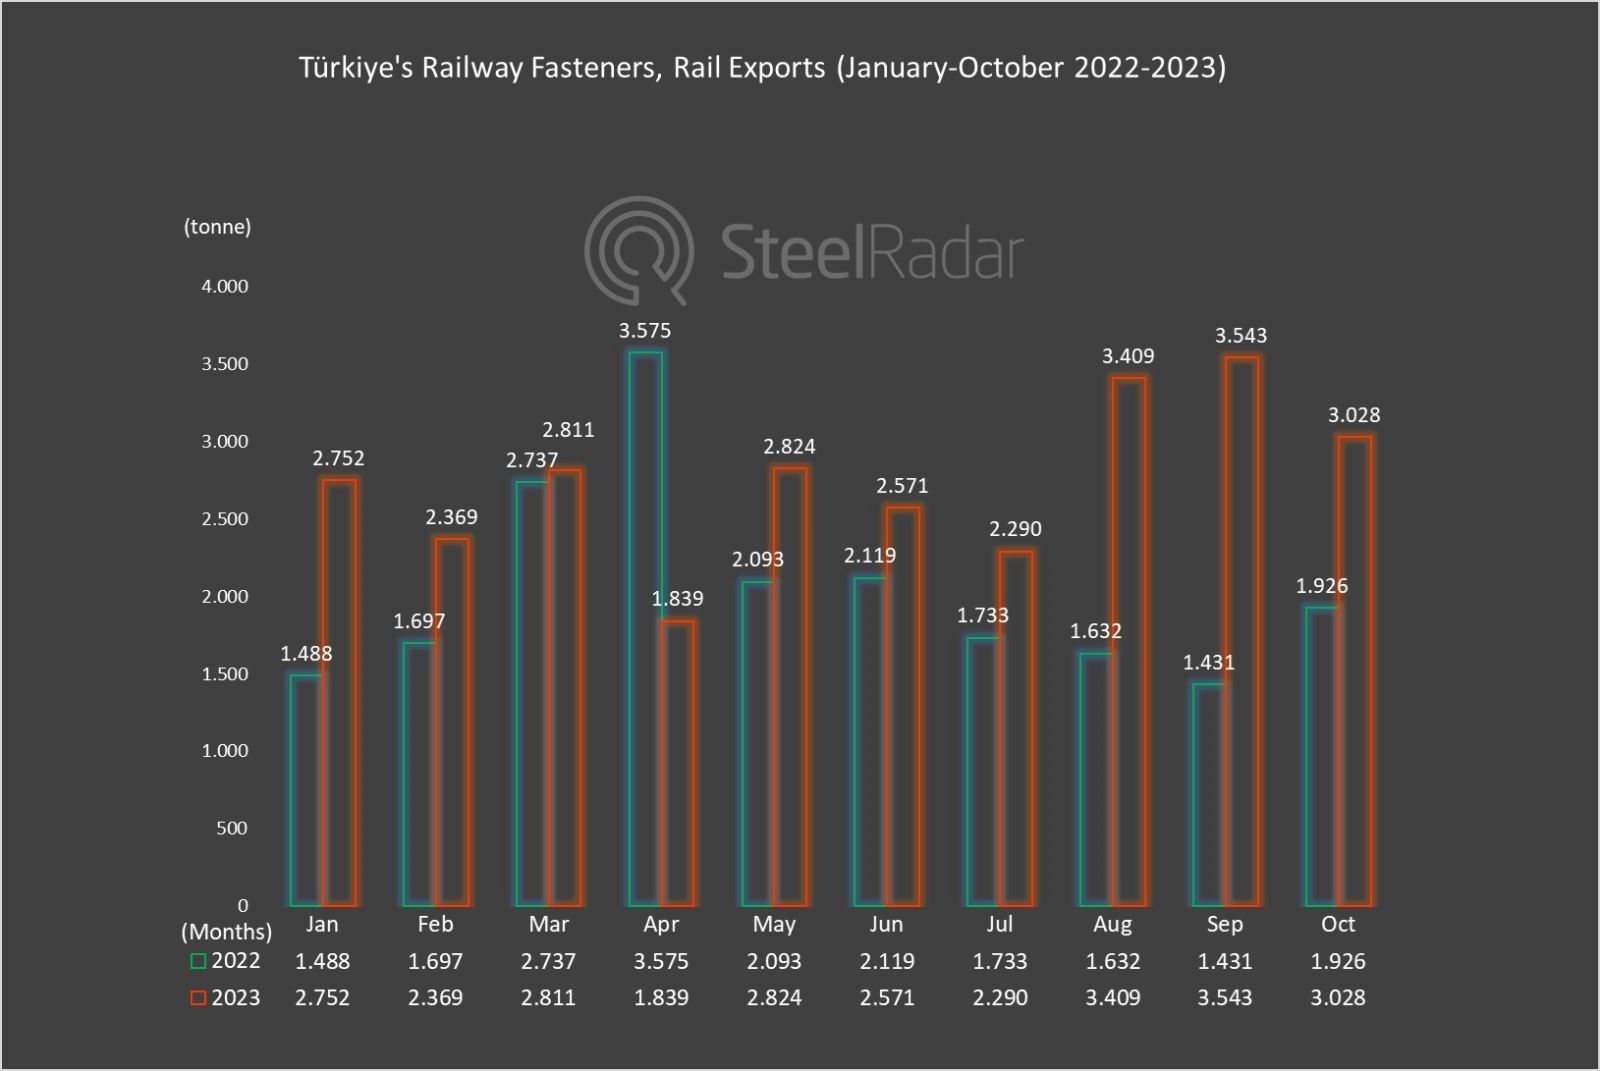 Mixed picture for Turkiye's imports of railway fastener rails